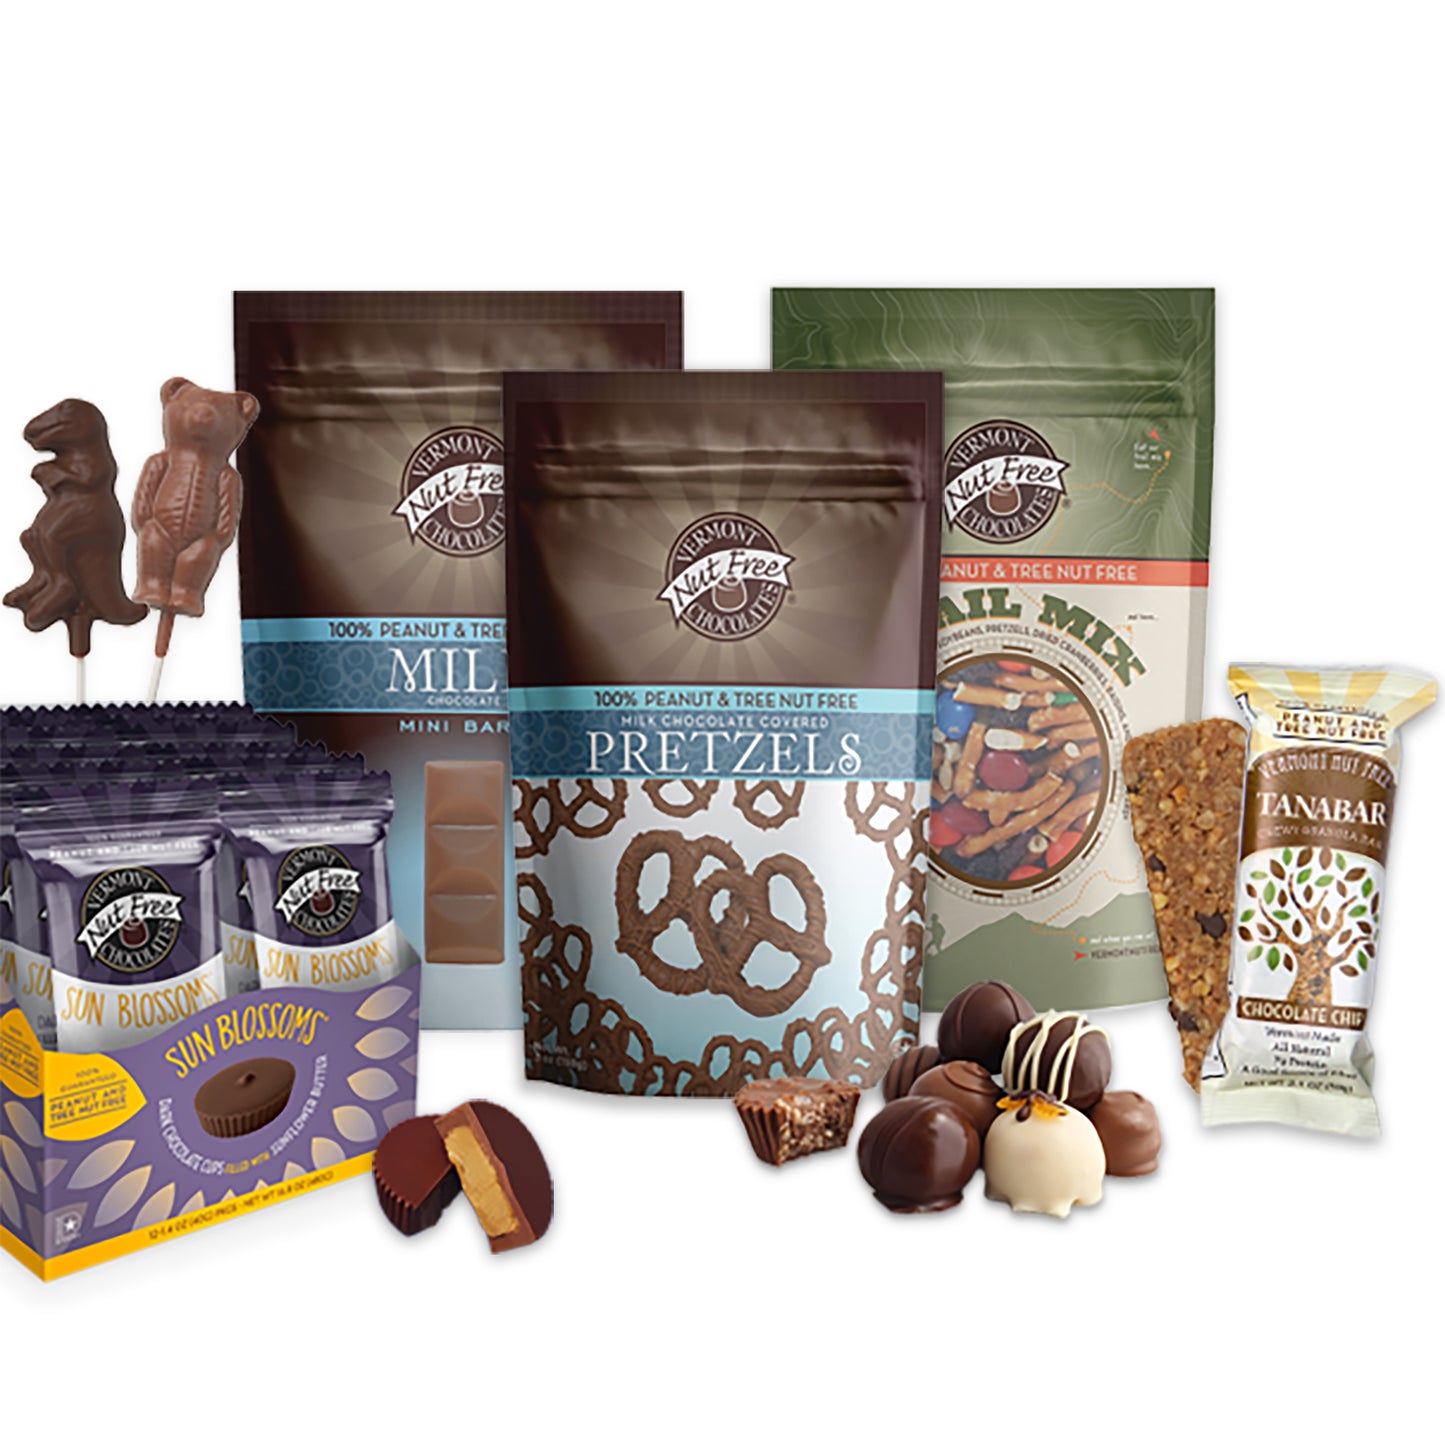 A range of Vermont Nut Free Chocolates products. Including chocolate pops, Sun Blossoms, Milk Chocolate Covered Mini Twist Pretzels, Milk Chocolate Mini Bars, Trail Mix, Truffles, and TANABAR Granola Bars